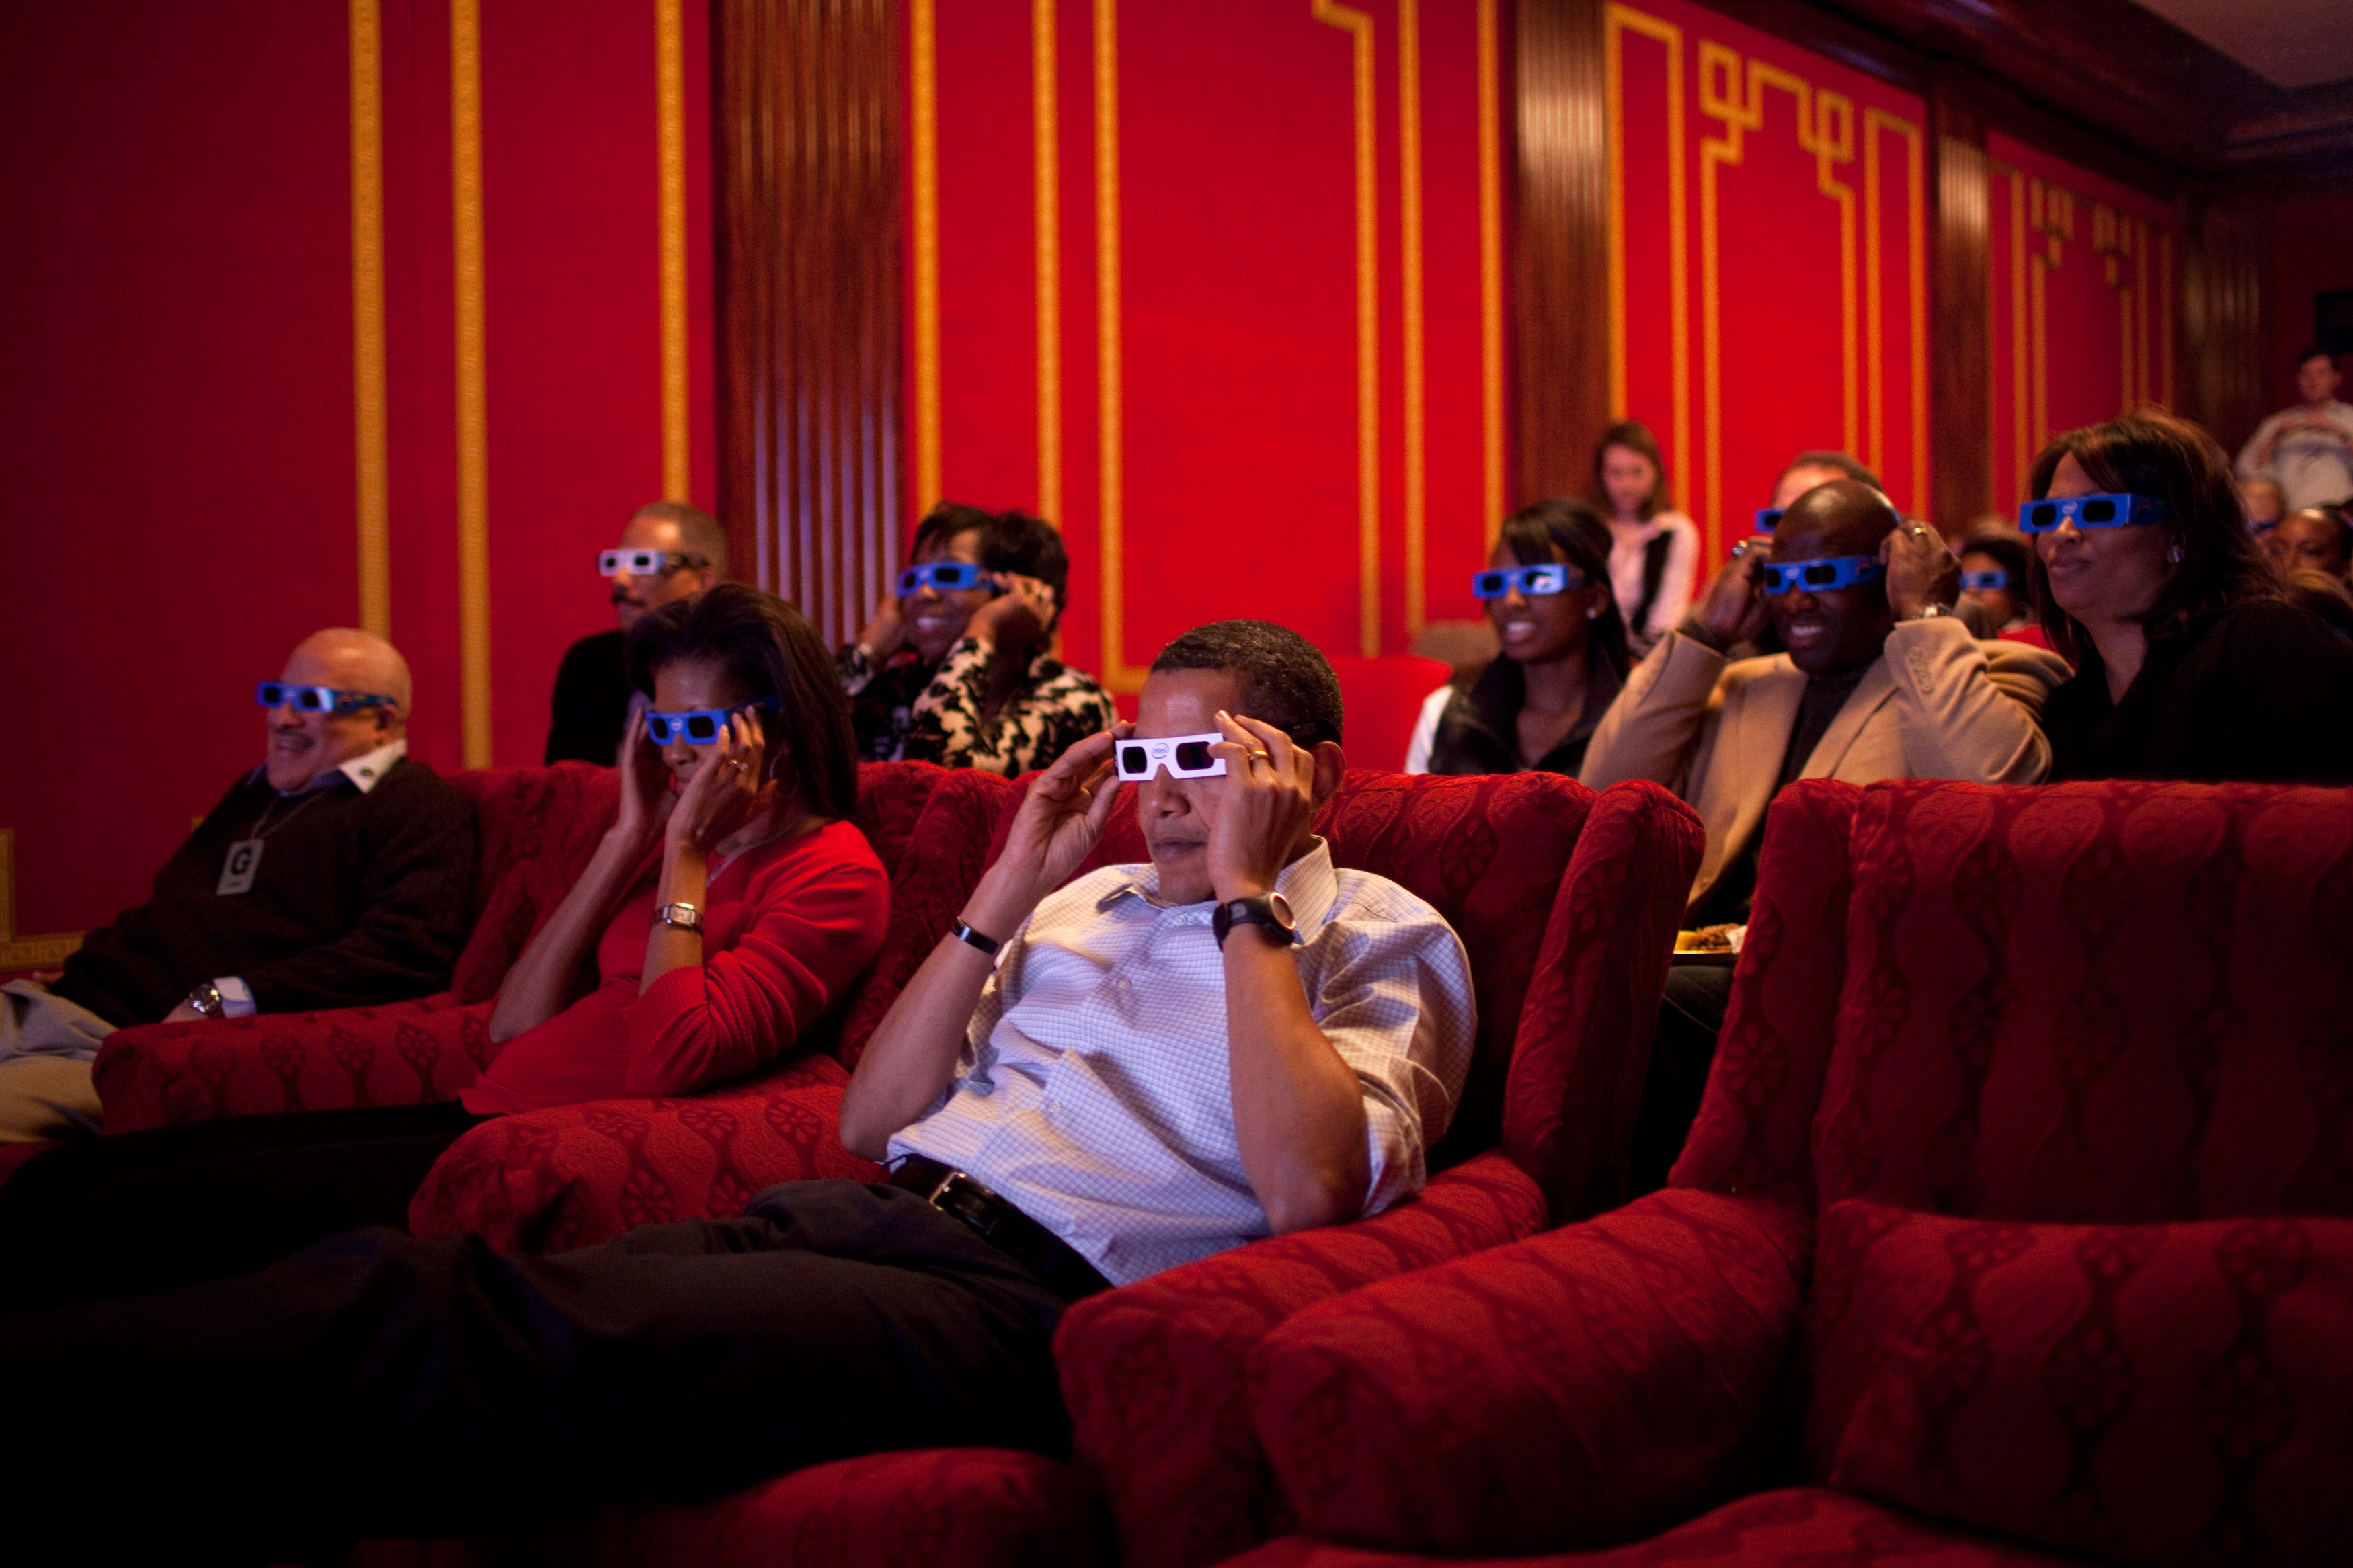 Barack and Michelle Obama looking the 2009 Superbowl with 3-D glasses